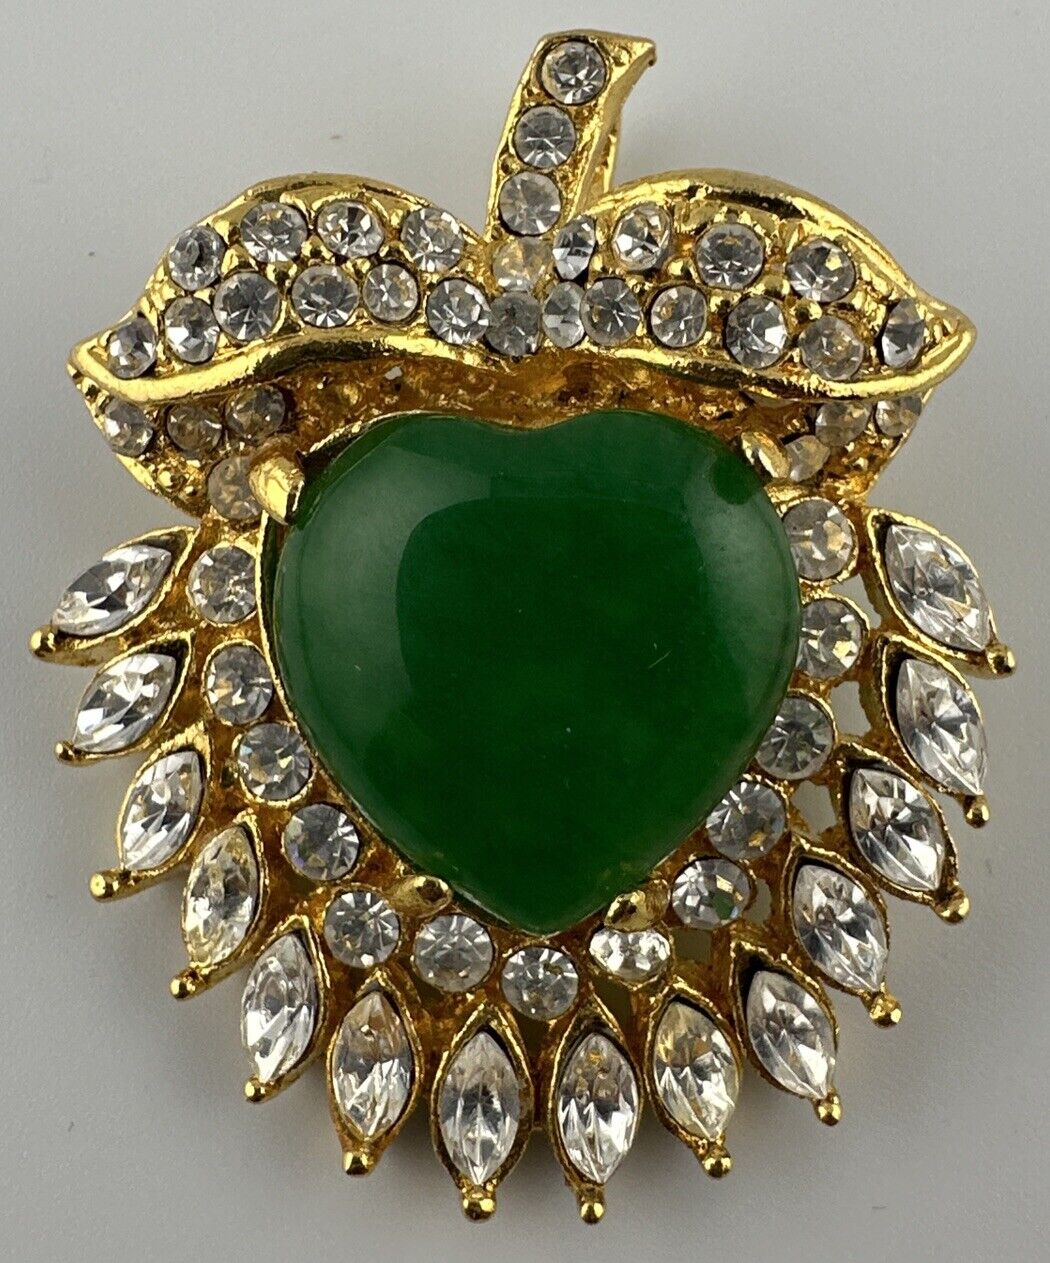 Gorgeous Vintage French Designer Brooch -Green Cabochons  & Crystals